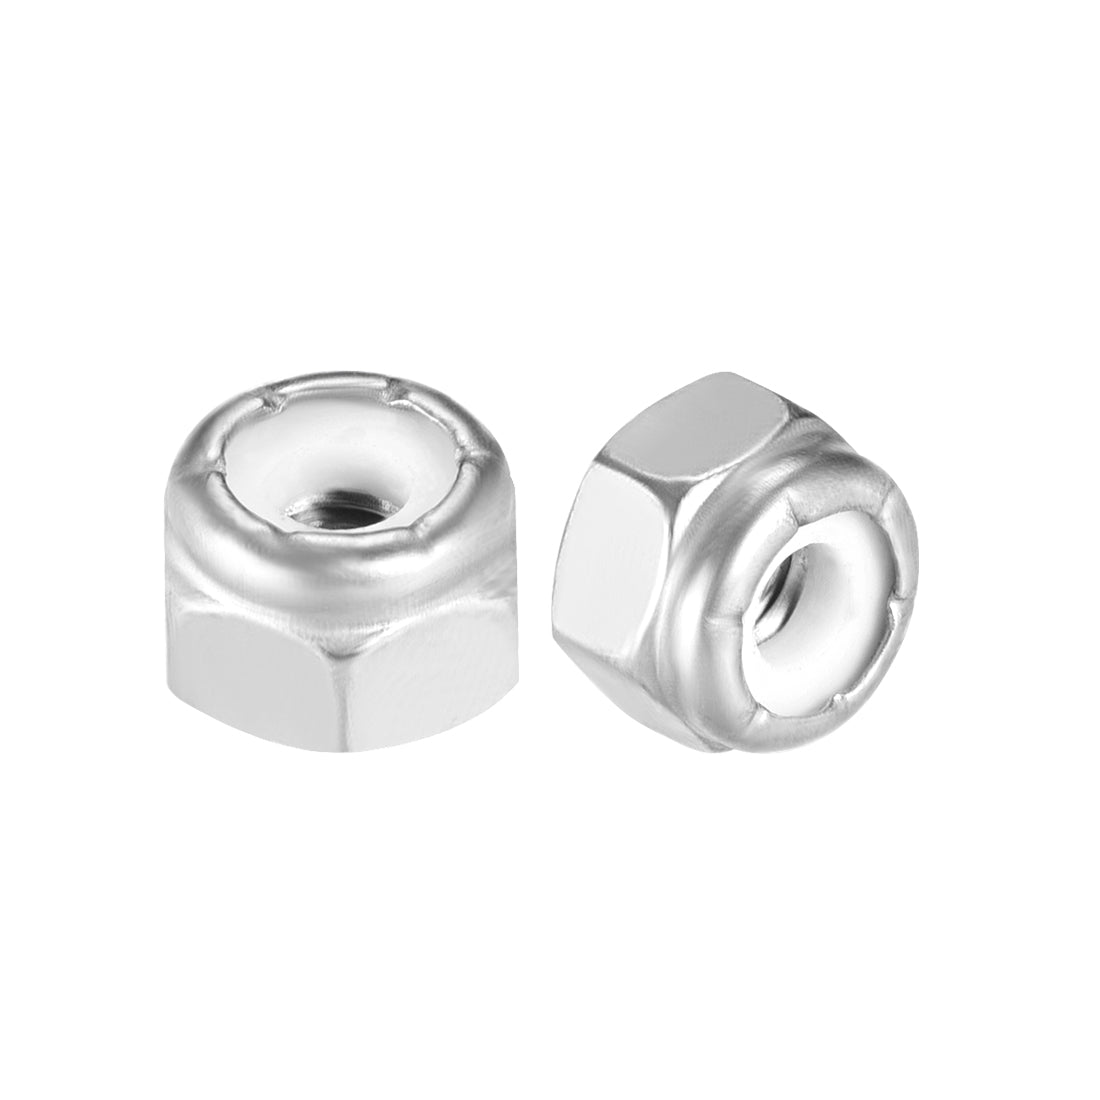 uxcell Uxcell 8#-32 Hex Lock Nuts Stainless Steel Nylon Insert Self-Lock Nuts, 10Pcs Silver